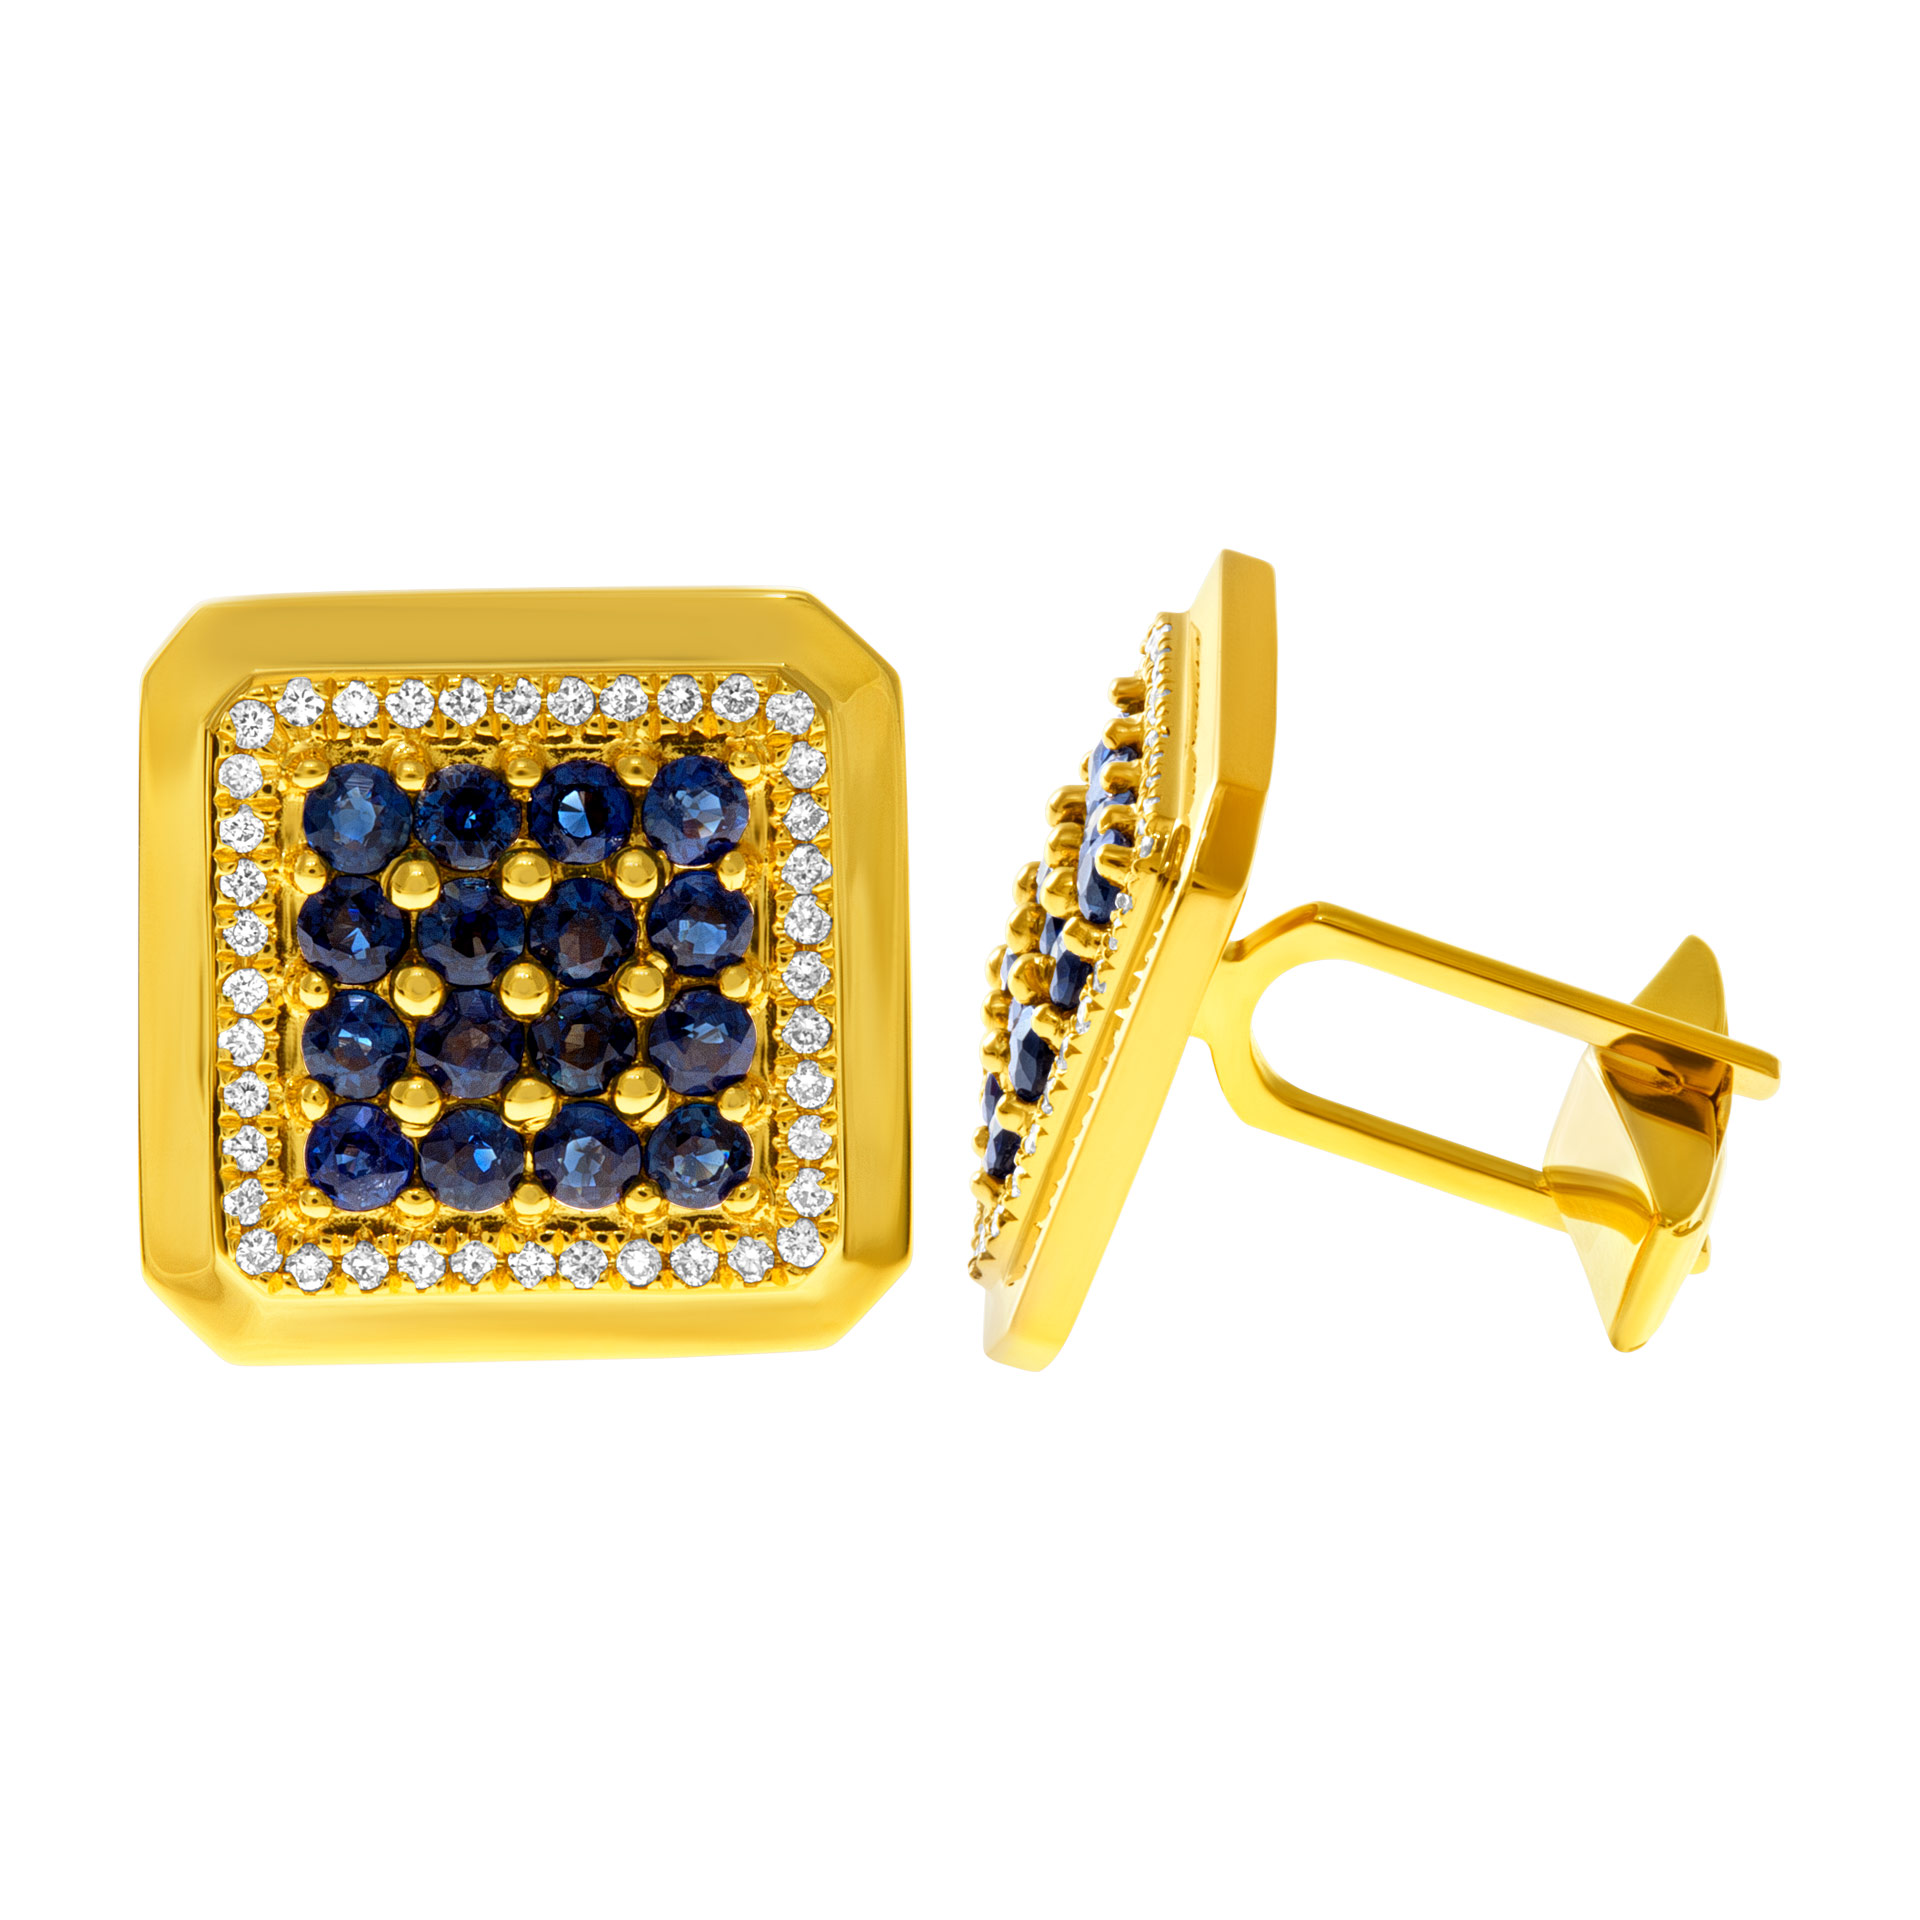 Blue sapphire and diamond cufflinks in 18k yellow gold. 3.20 carats in sapphires image 1